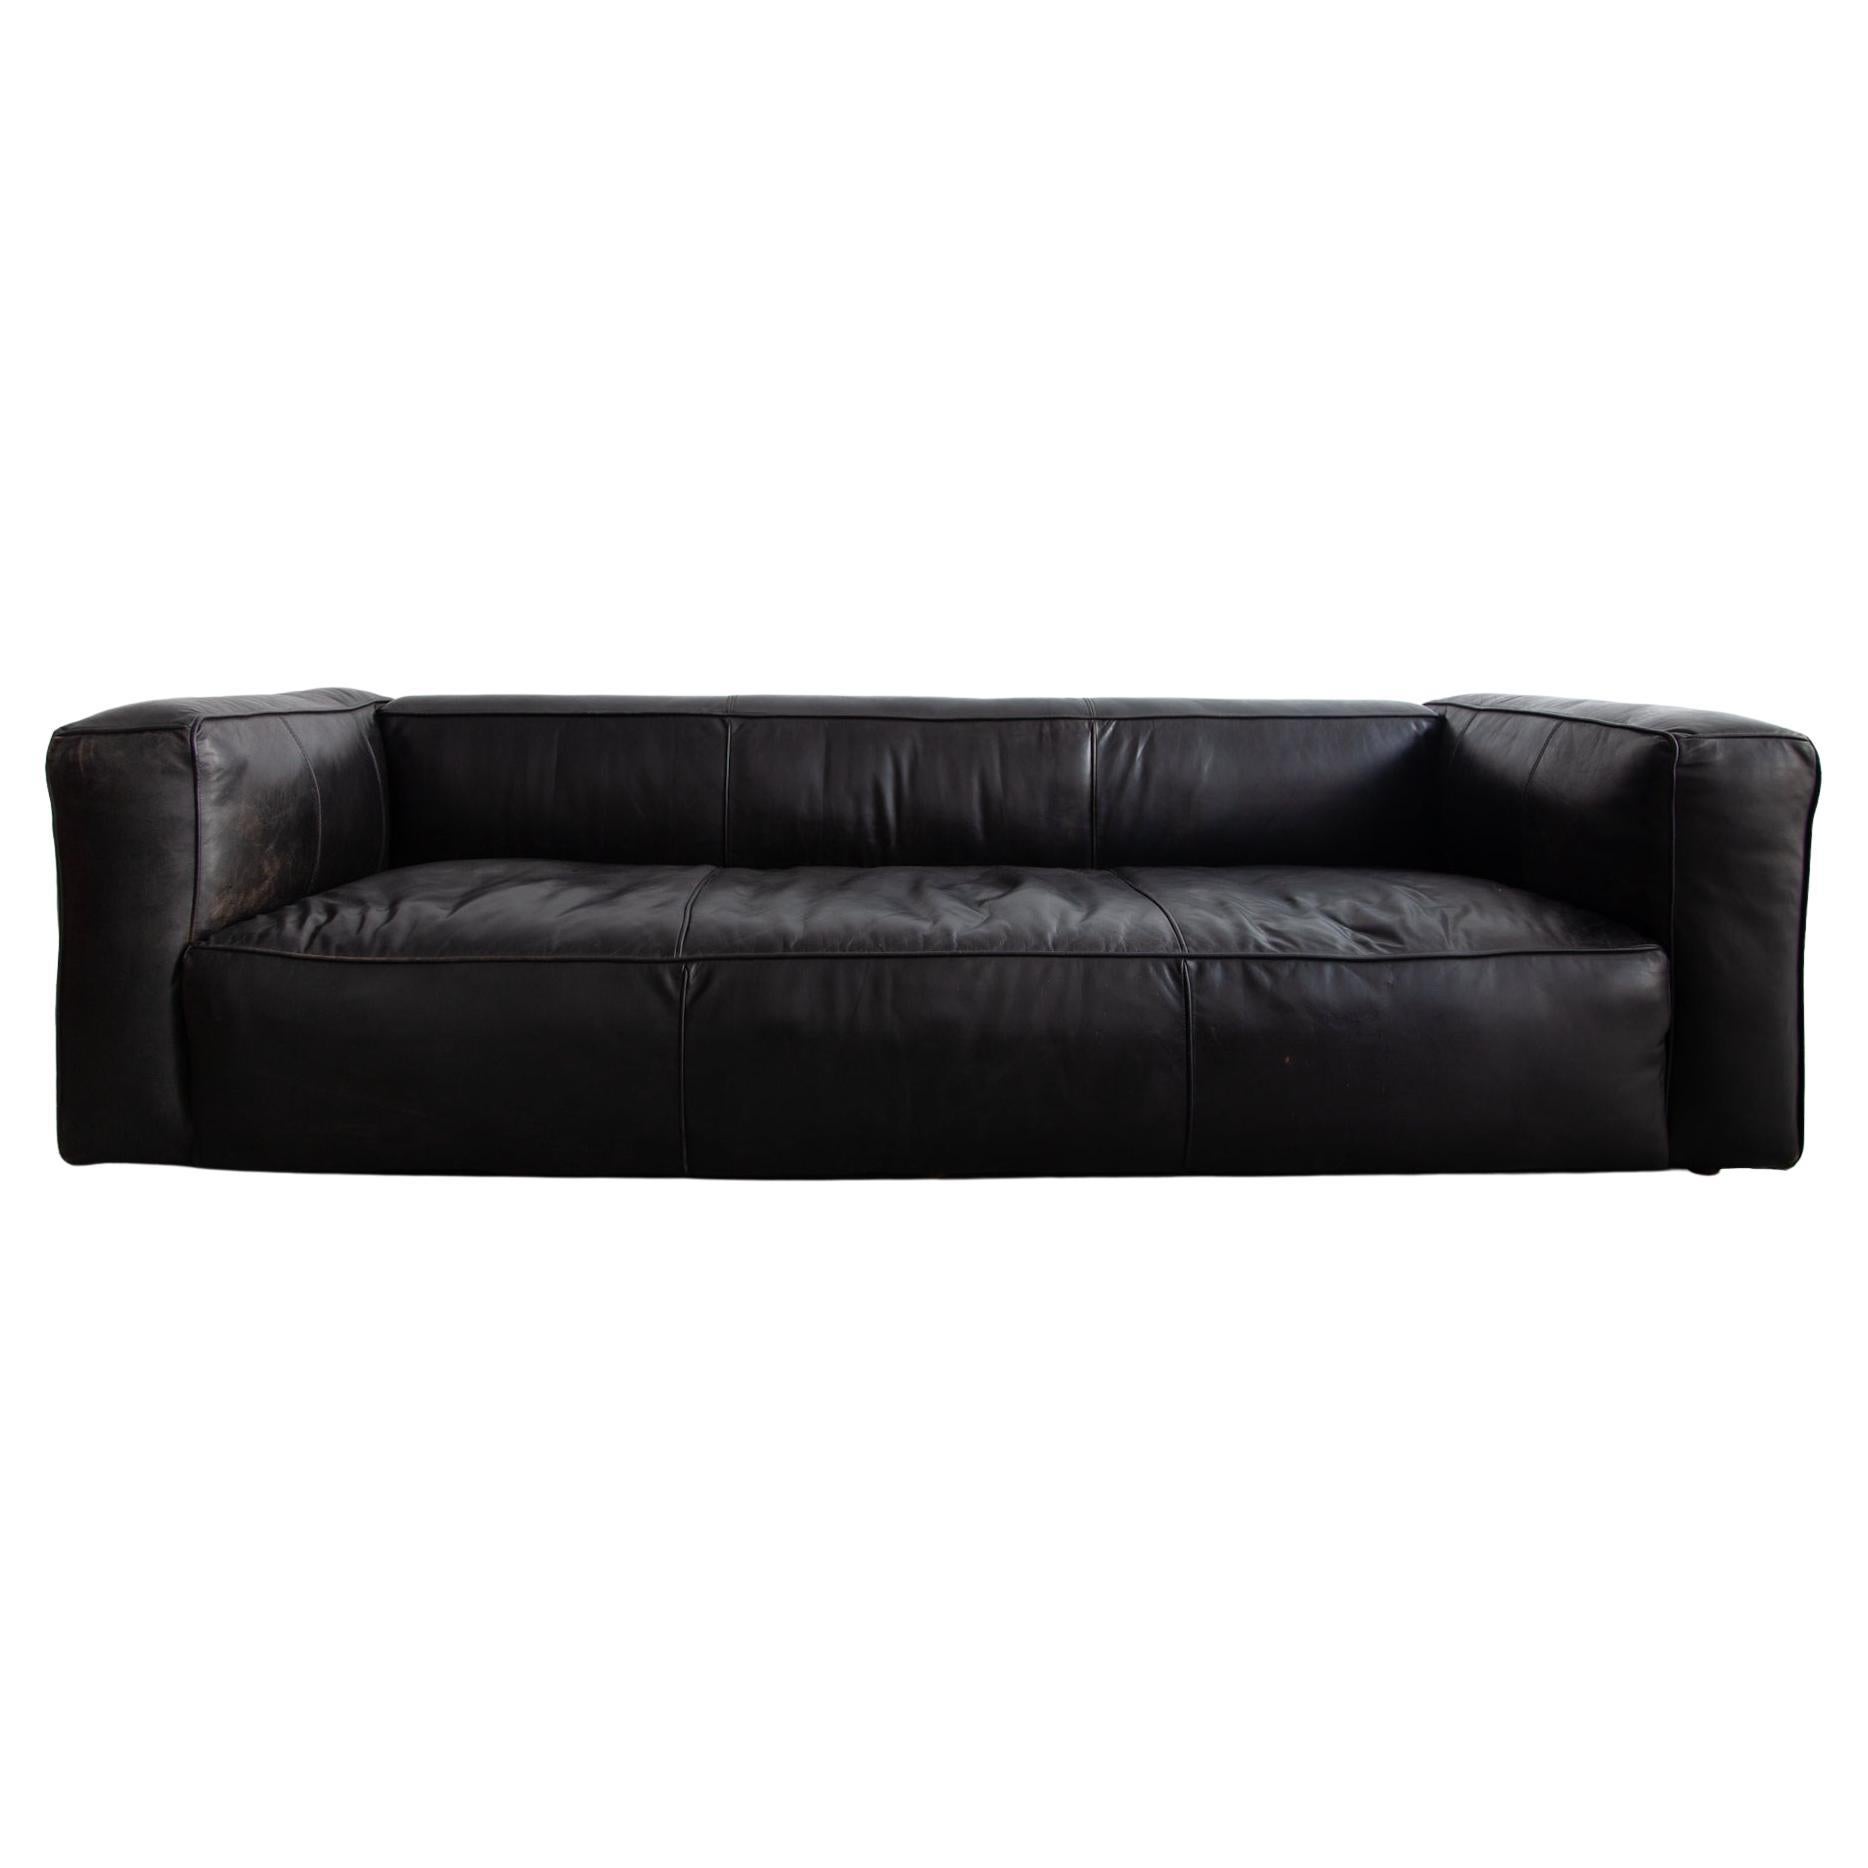 Large lounge leather comfortable sofa, daybed in black leather in original good condition with an architectural character. A sofa that could be set out in the middle of the room the geometrical lines of the exterior goes nicely with the soft bulky